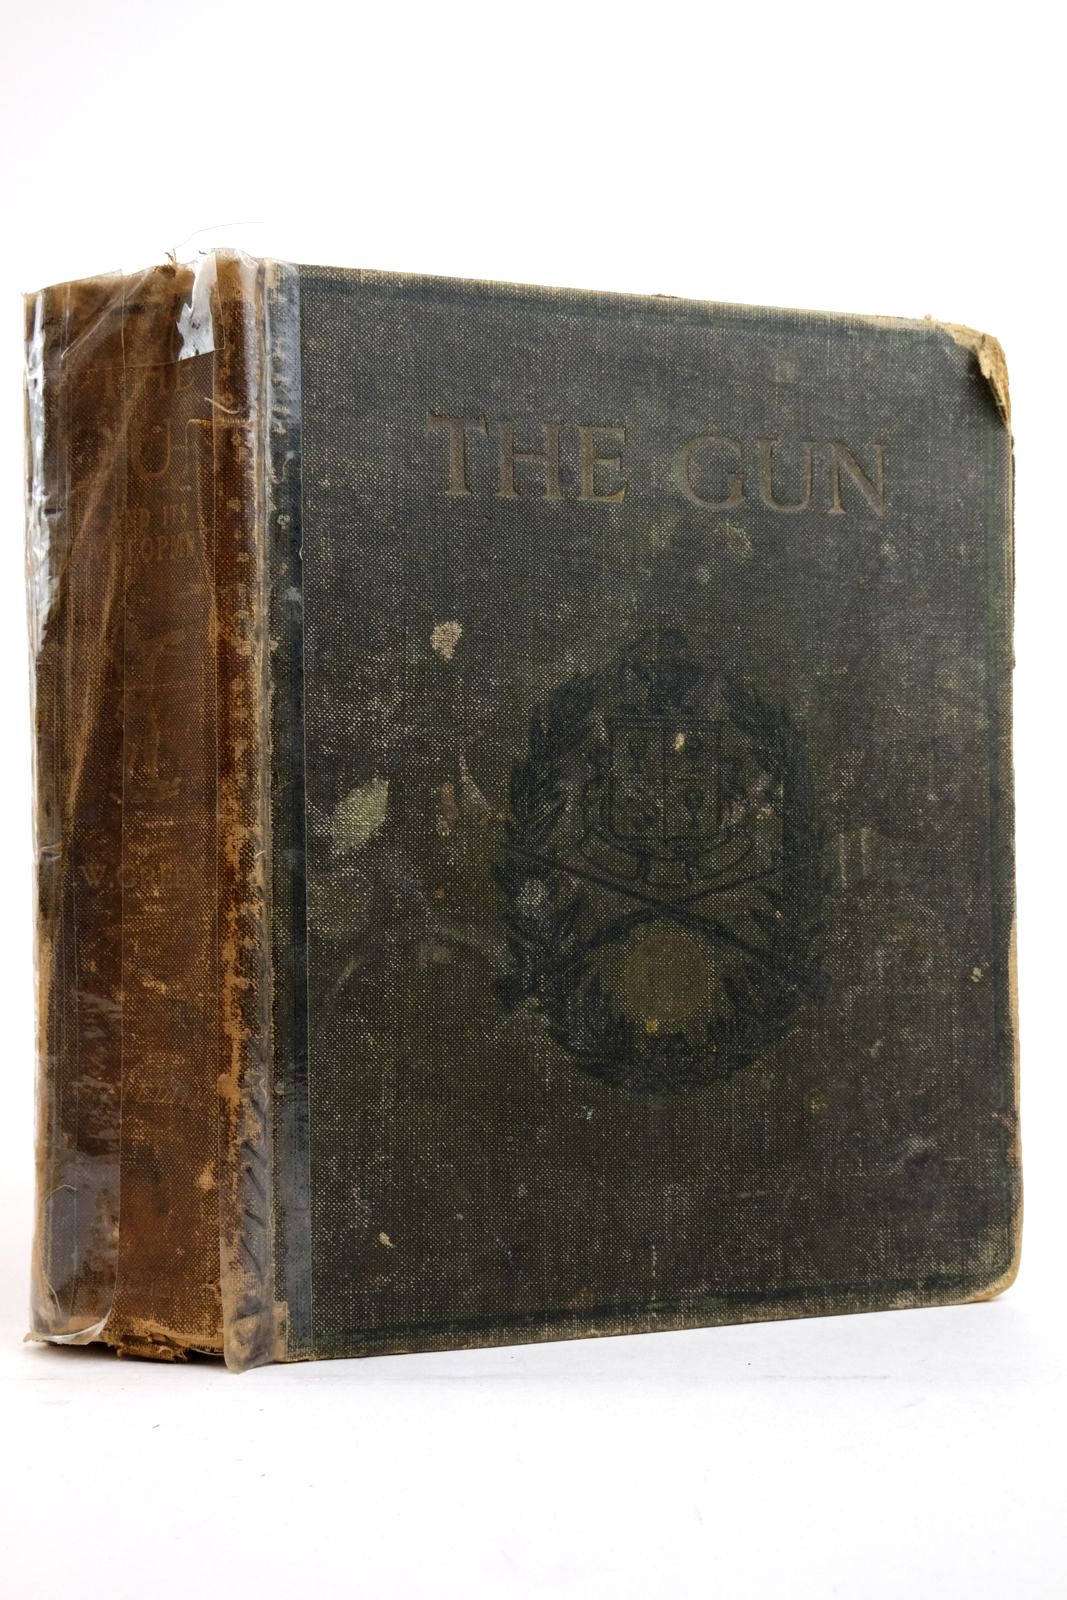 Photo of THE GUN AND ITS DEVELOPMENT written by Greener, W.W. published by Cassell &amp; Company Limited (STOCK CODE: 2135885)  for sale by Stella & Rose's Books